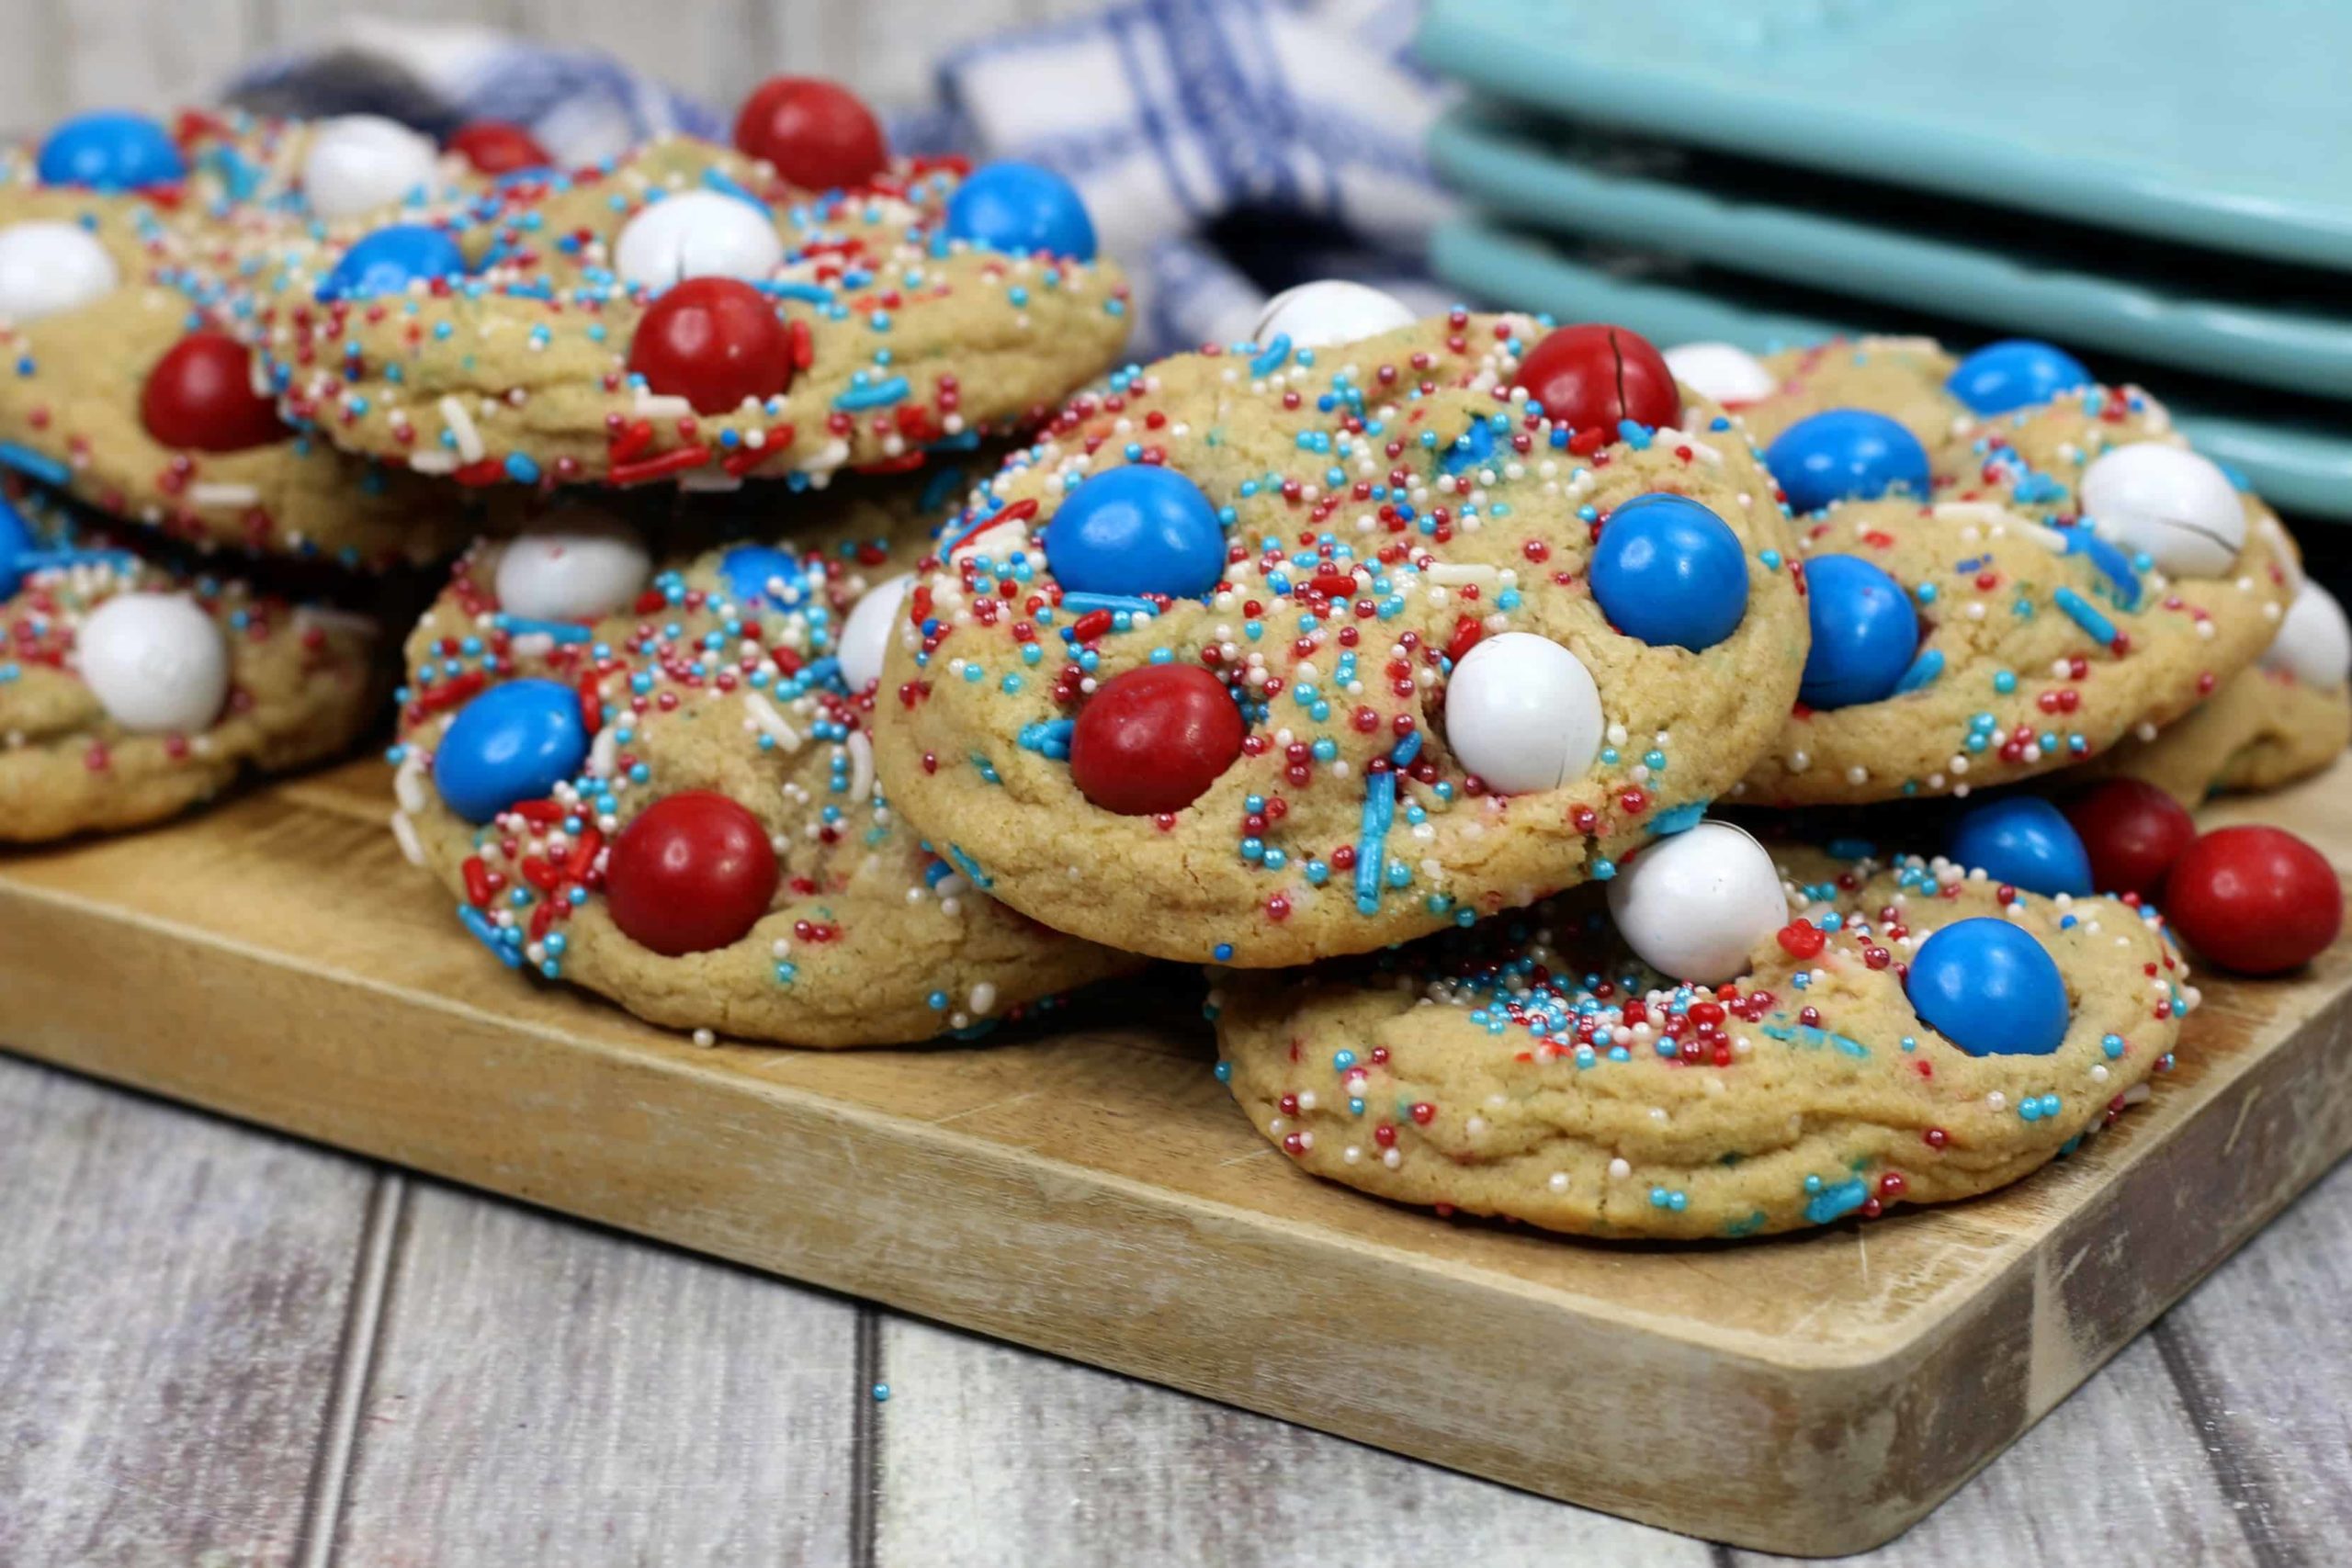 Festive and Delicious 4th of July Red, White, and Blue Cookies With M&Ms